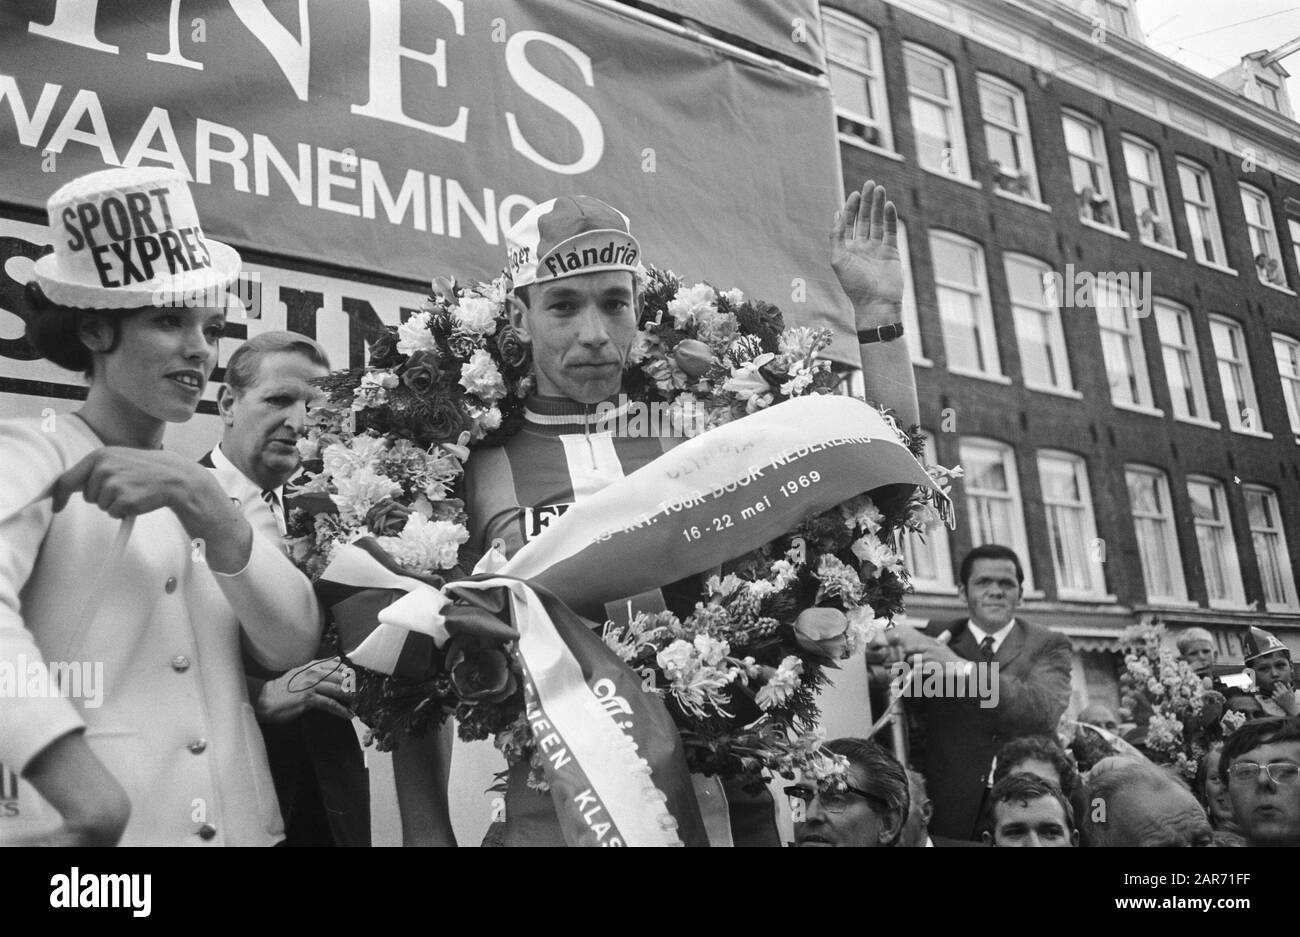 Olympias Toer, winner Peter Legierse will be honoured in Amsterdam finish Date: May 22, 1969 Location: Amsterdam, Noord-Holland Keywords: Winners, finish, cycling Stock Photo